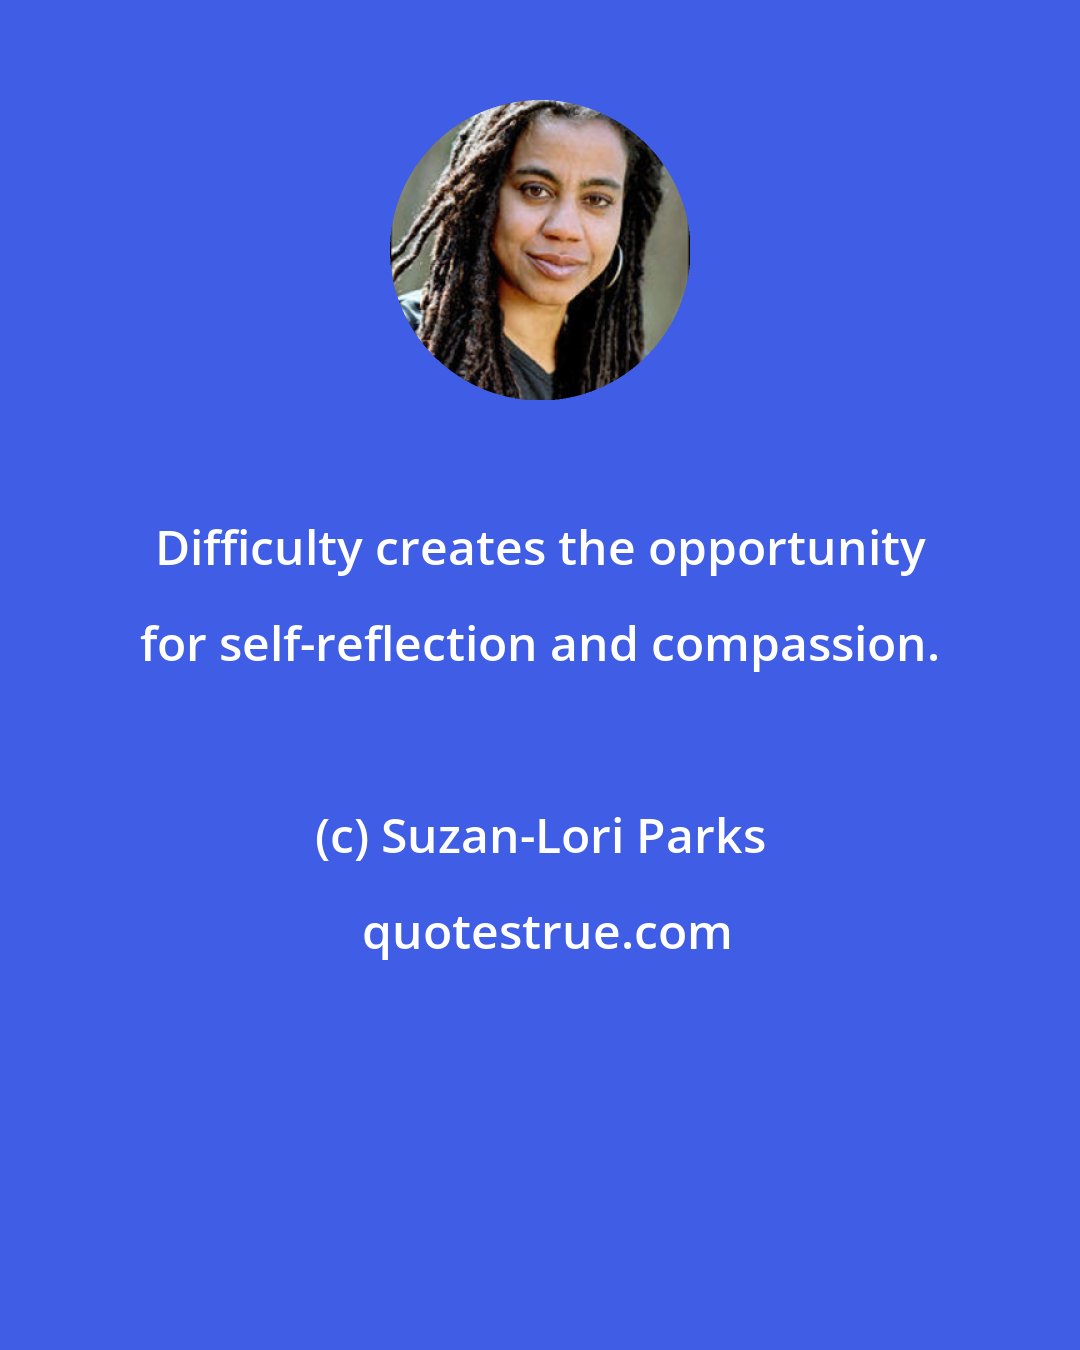 Suzan-Lori Parks: Difficulty creates the opportunity for self-reflection and compassion.